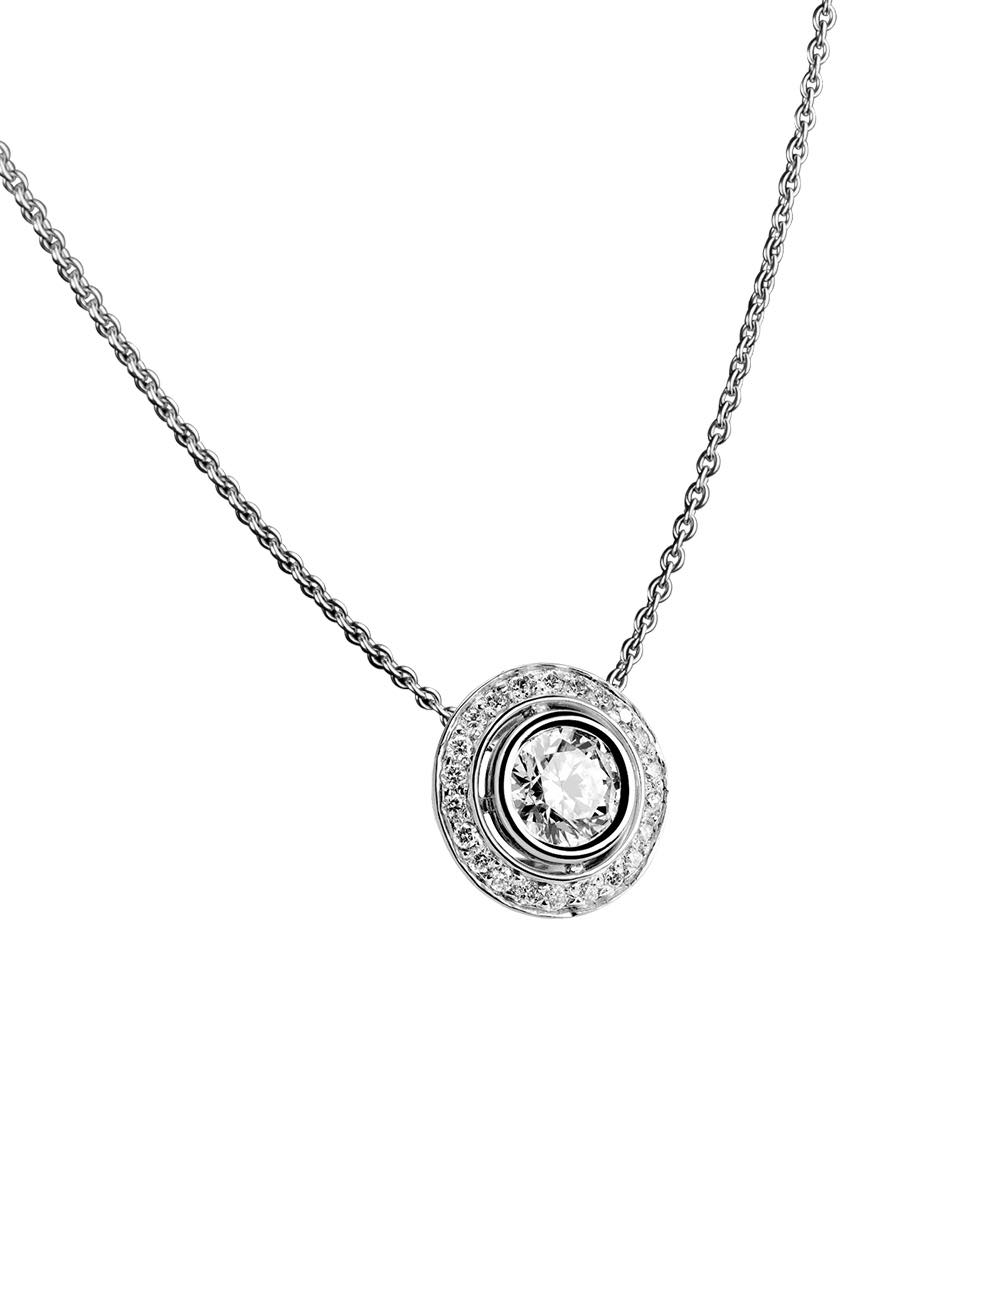 Luxury necklace for women, a 0.40 carat white diamond magnified by a white diamonds halo